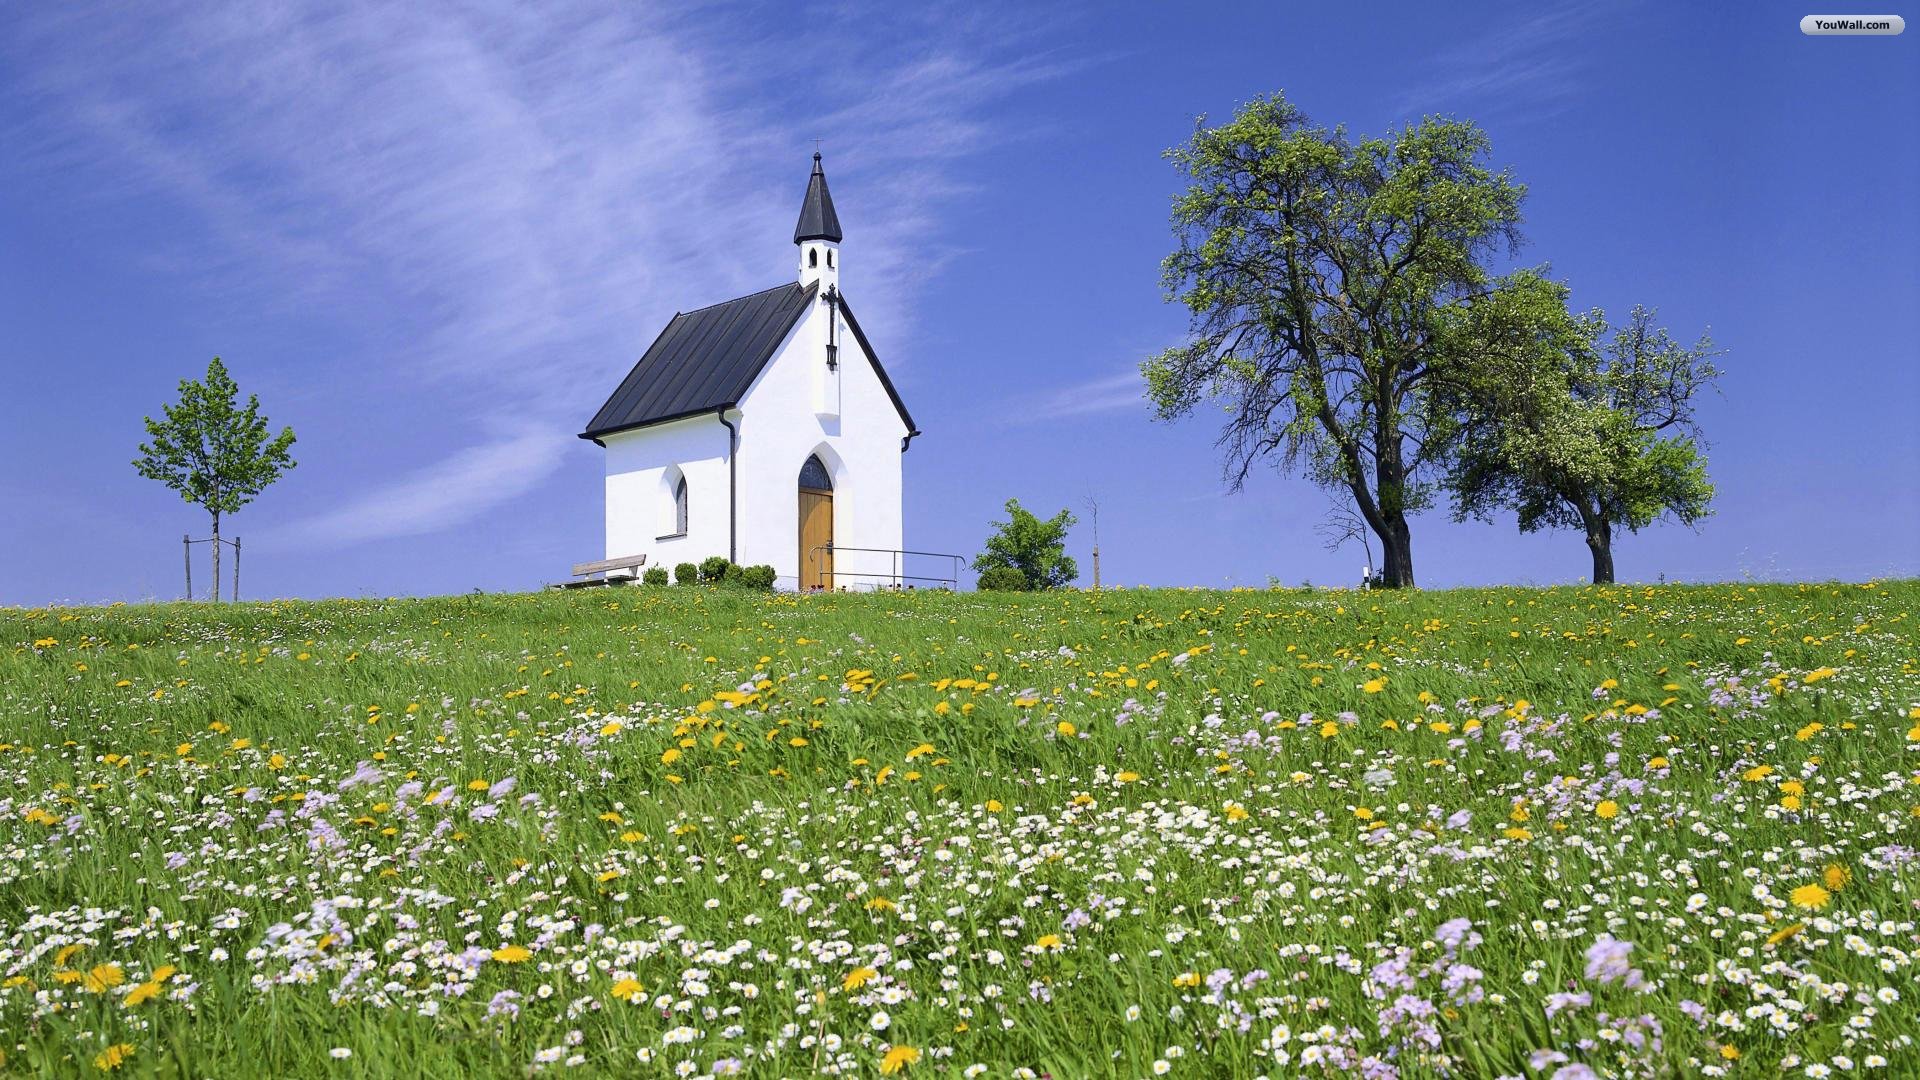 77 Church Background Images On Wallpapersafari